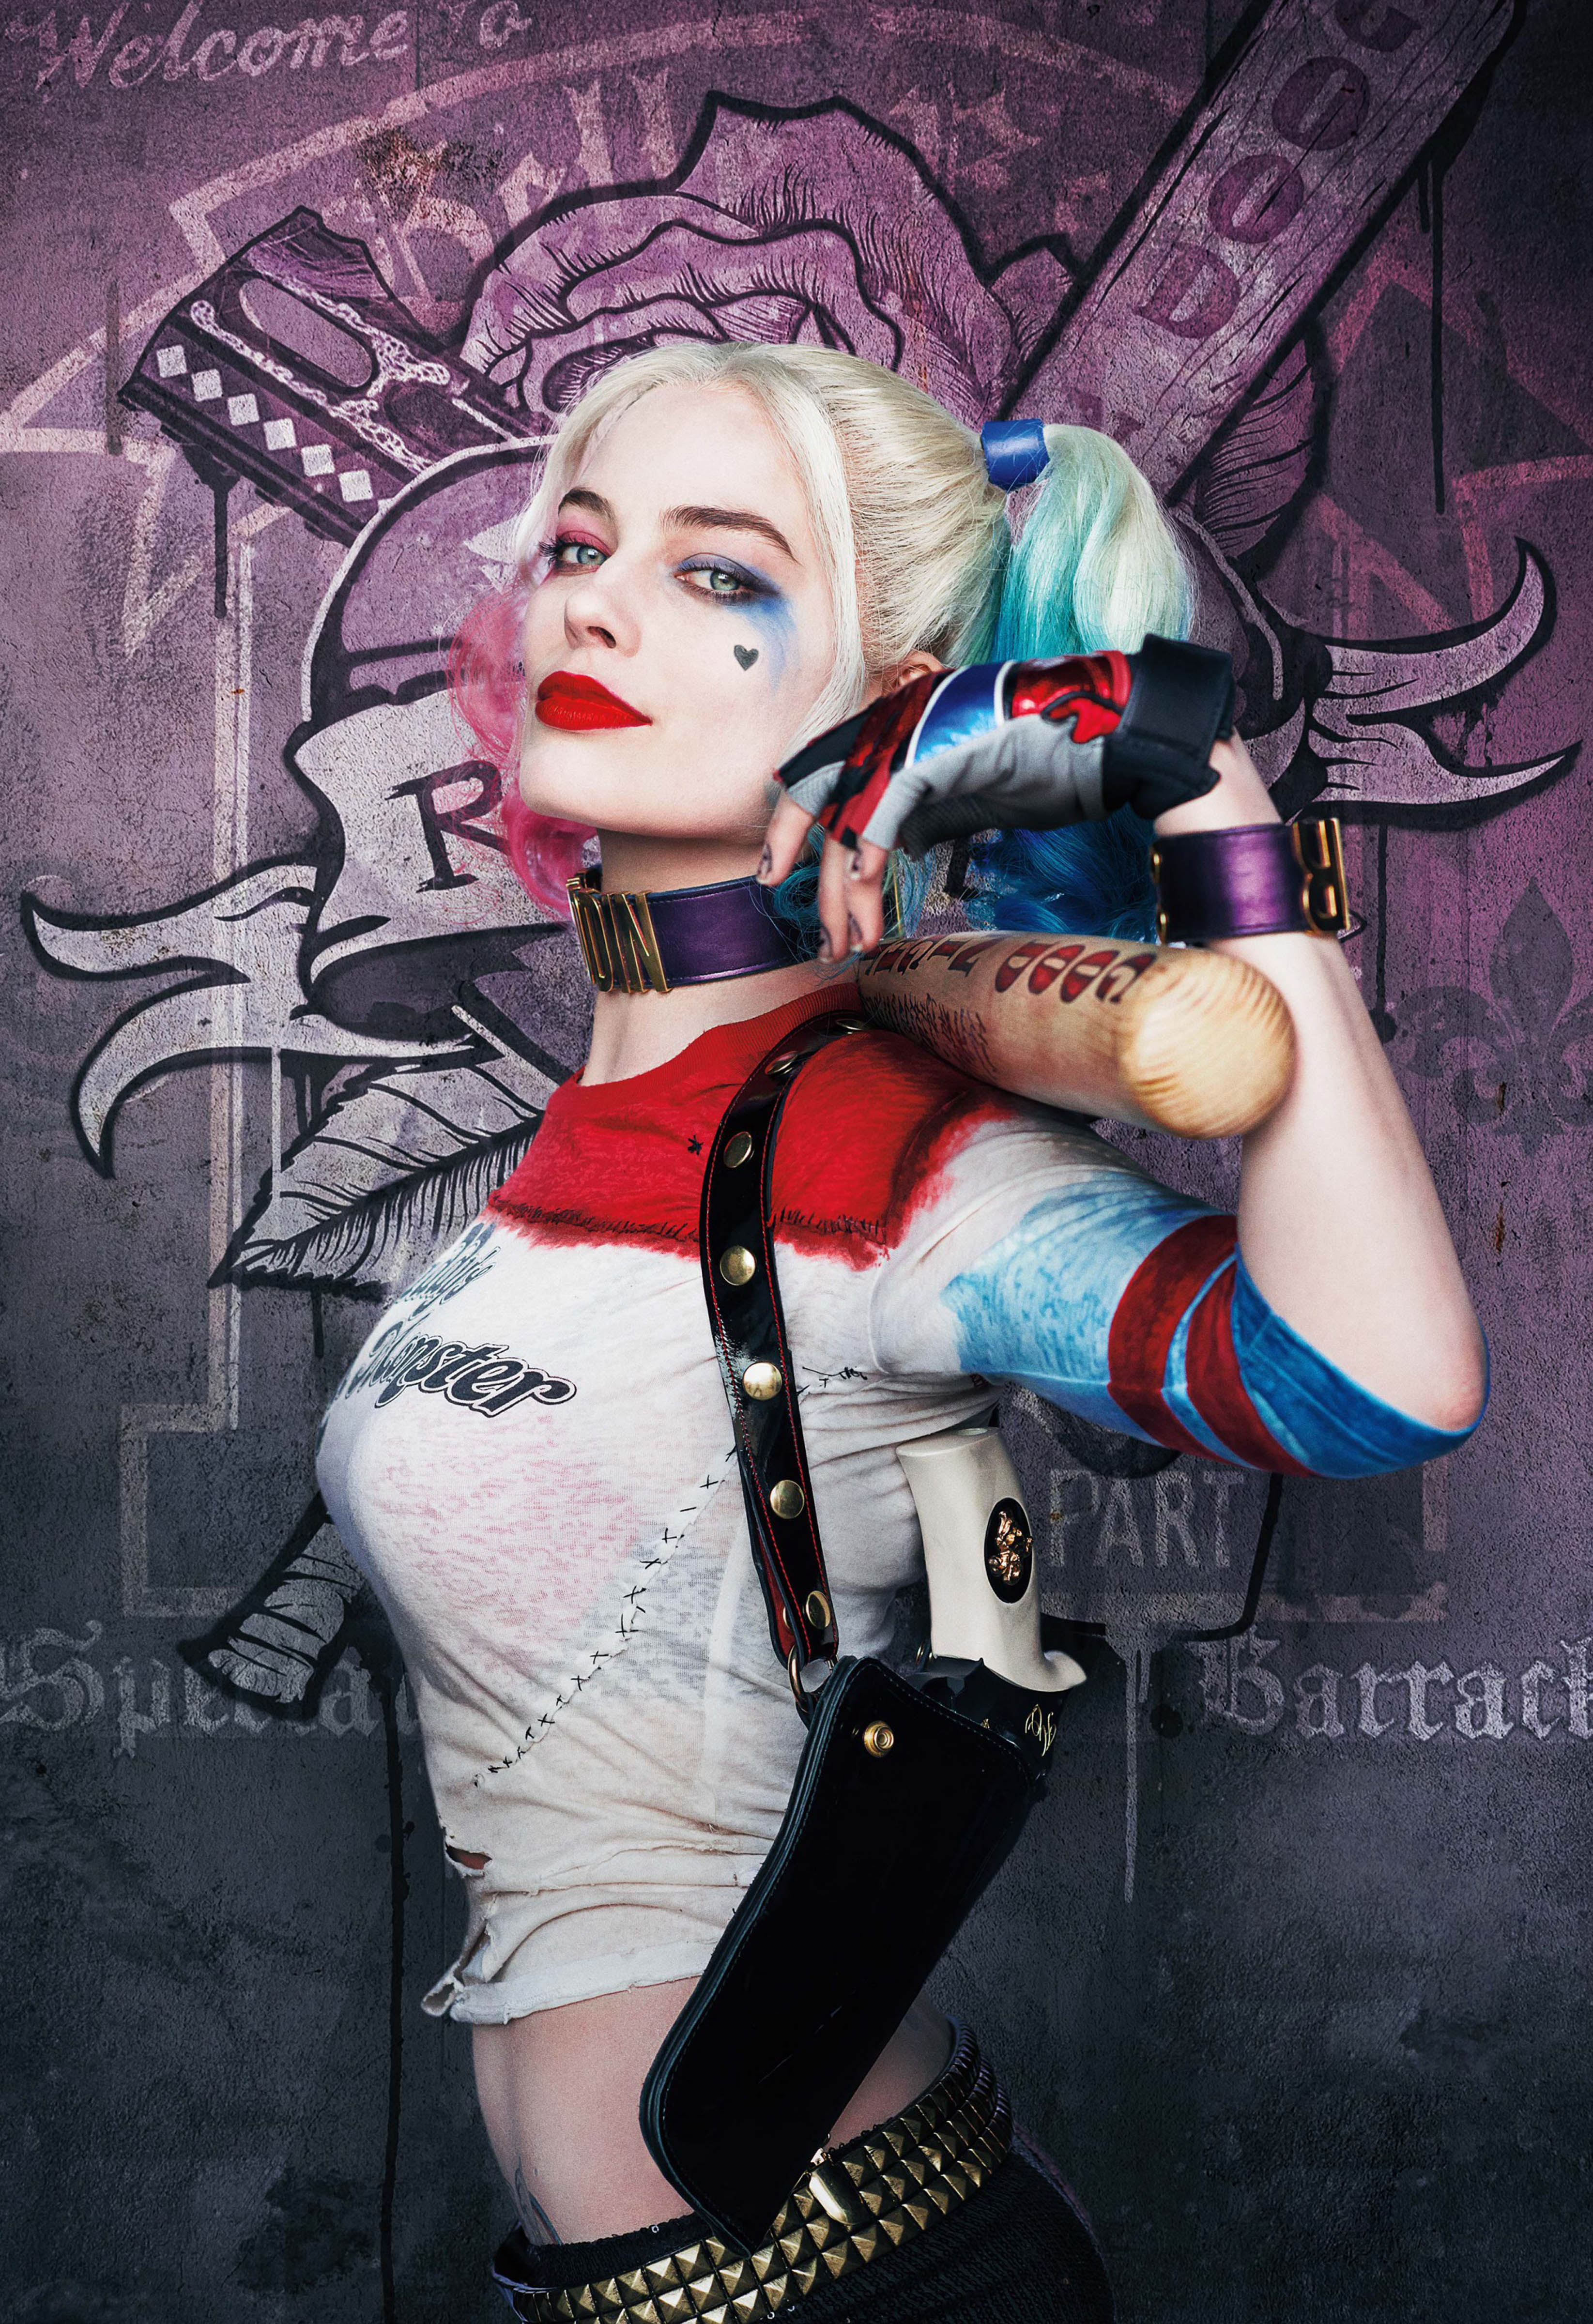 dave kintner add photo hot pictures of harley quinn